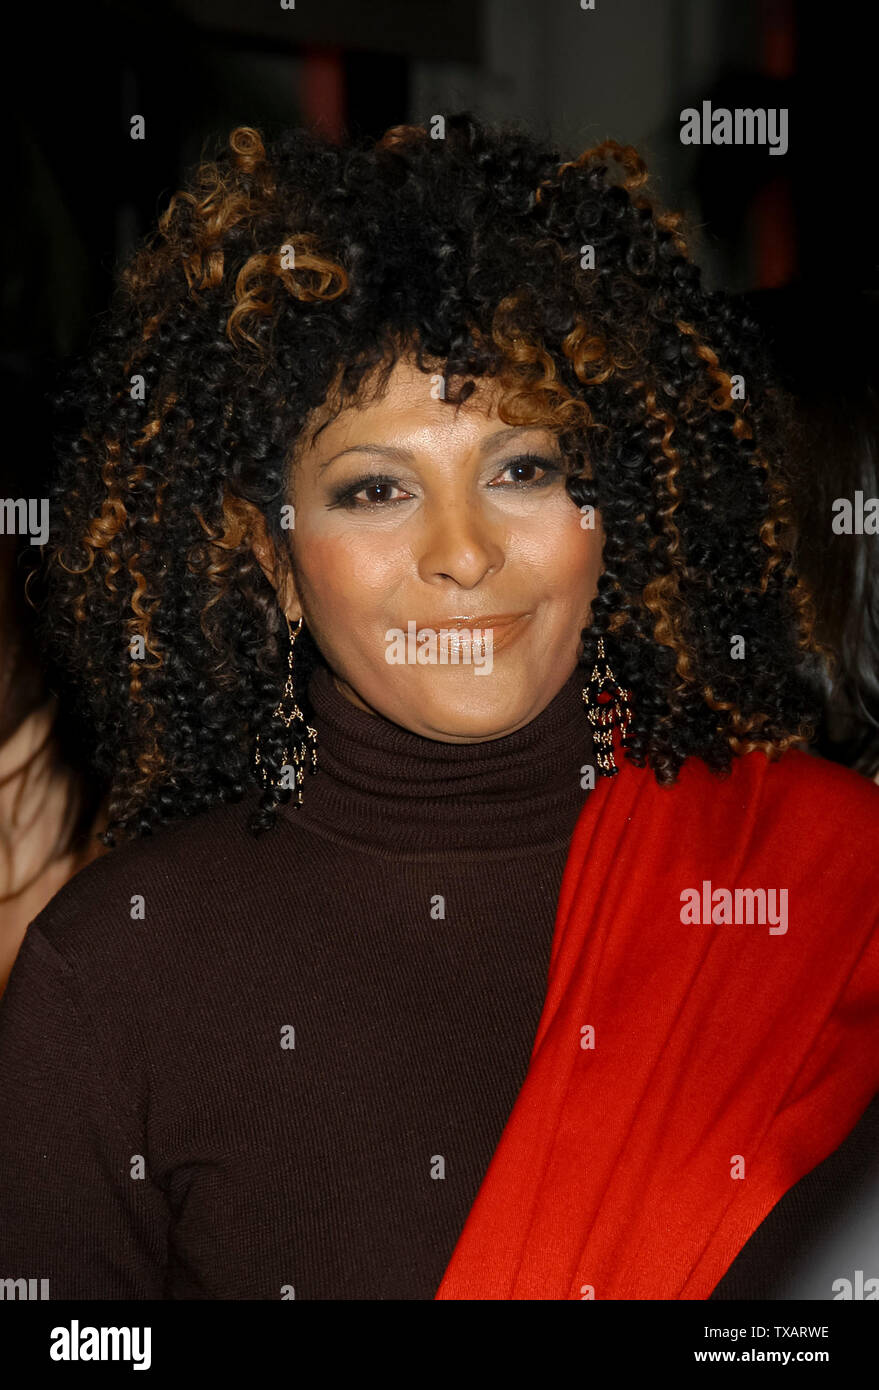 Pam Grier at the "The L Word" Premiere Screening Of The New Original Showtime Series at the LACMA Bing Theater in  Los Angeles, CA. The event took place on Tuesday, January 6, 2004. Photo by: SBM / PictureLux  -  File Reference # 33790-4026SMBPLX Stock Photo